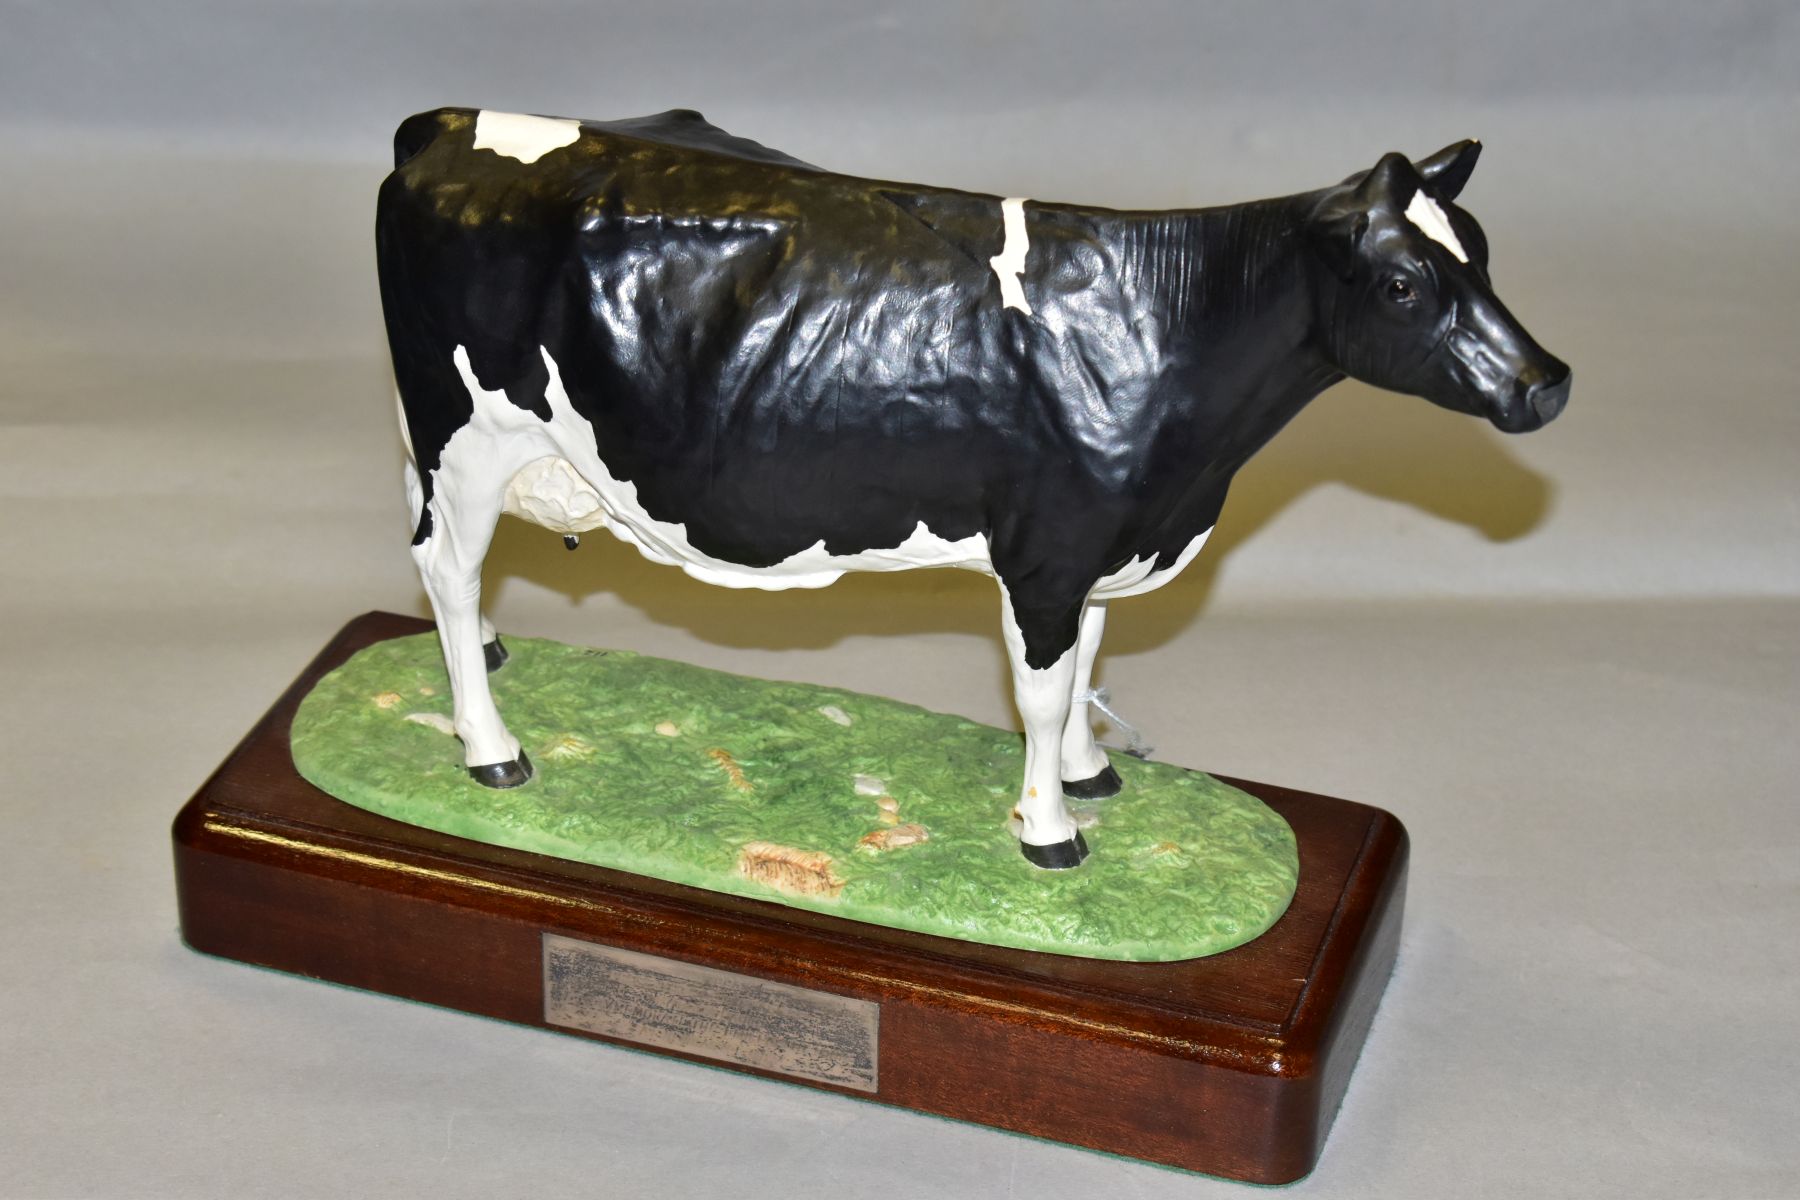 A SHEBEG ISLE OF MAN POTTERY FRESIAN COW, modelled by John Harpur, numbered 112, mounted to a wooden